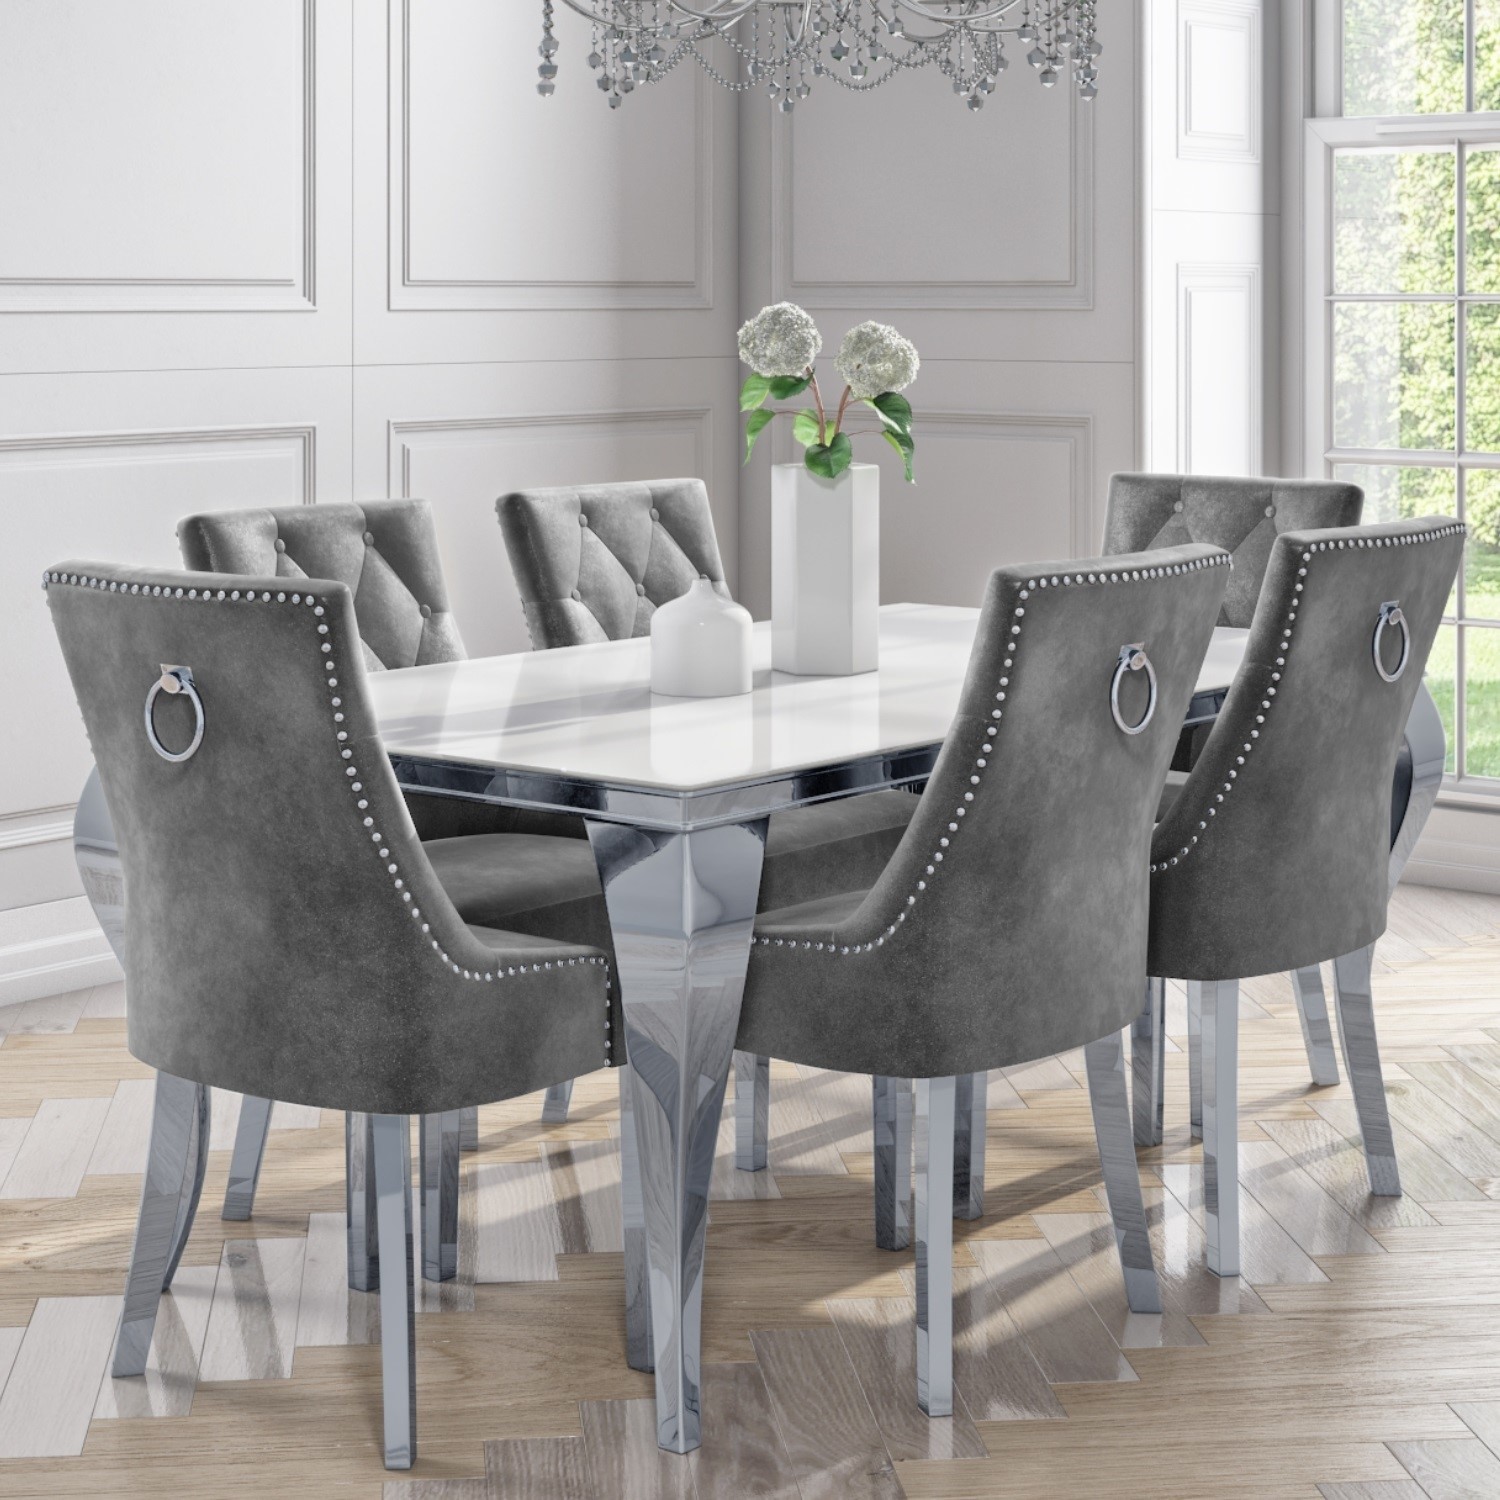 White And Mirrored Dining Table With 6, What Size Is A Table With 6 Chairs